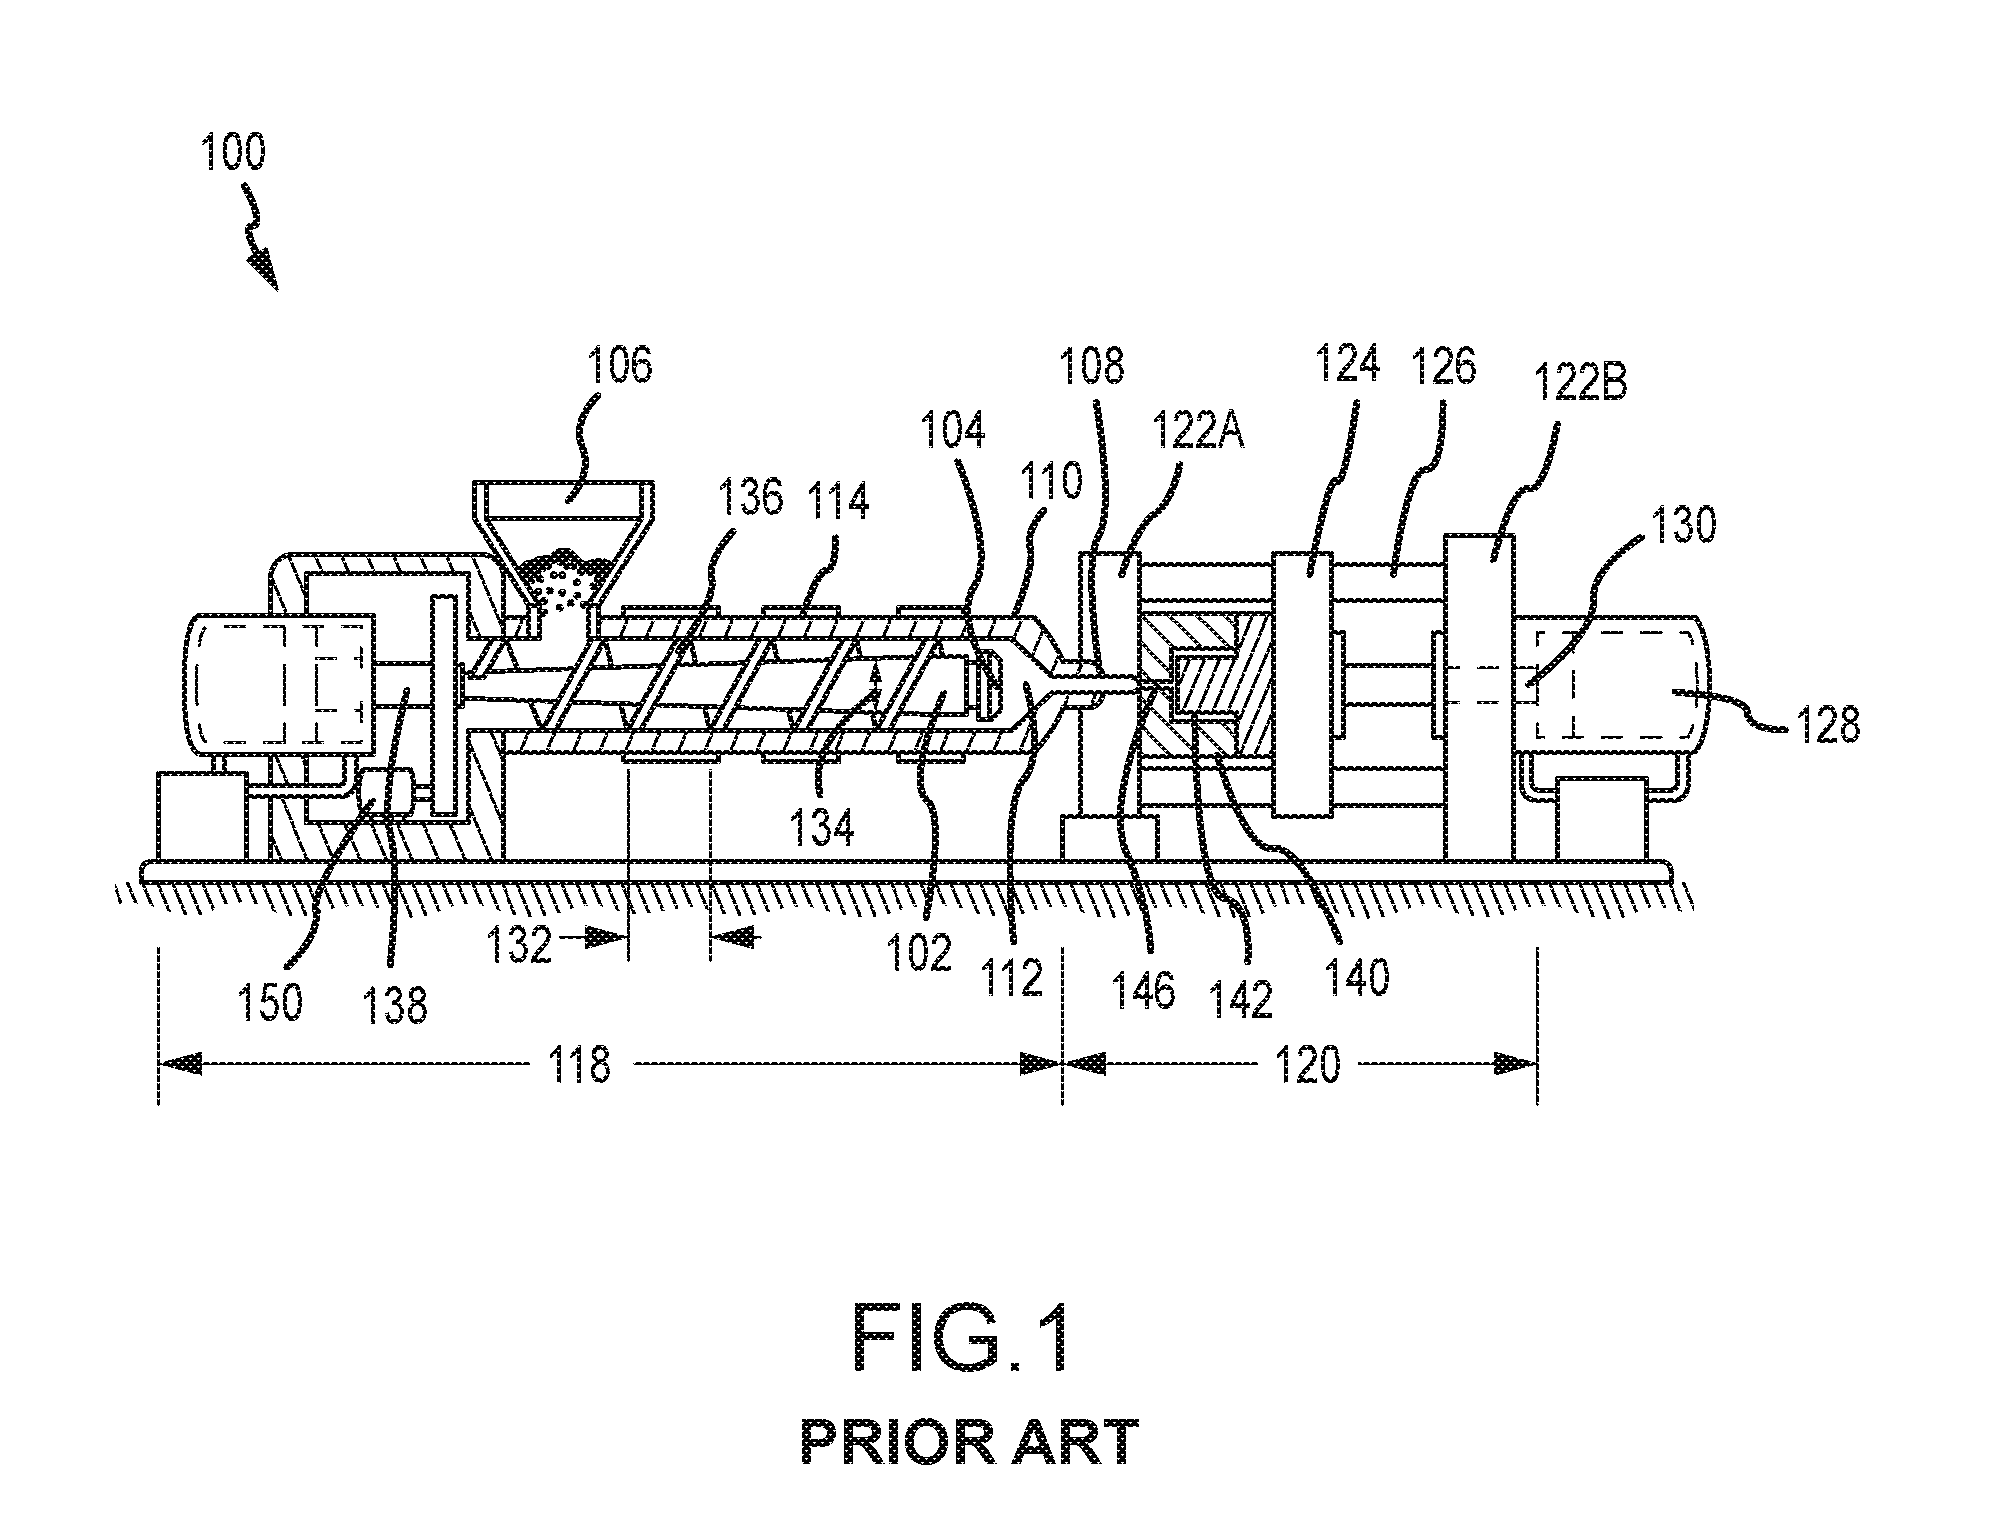 Molding system and method of heating a material inside a molding system